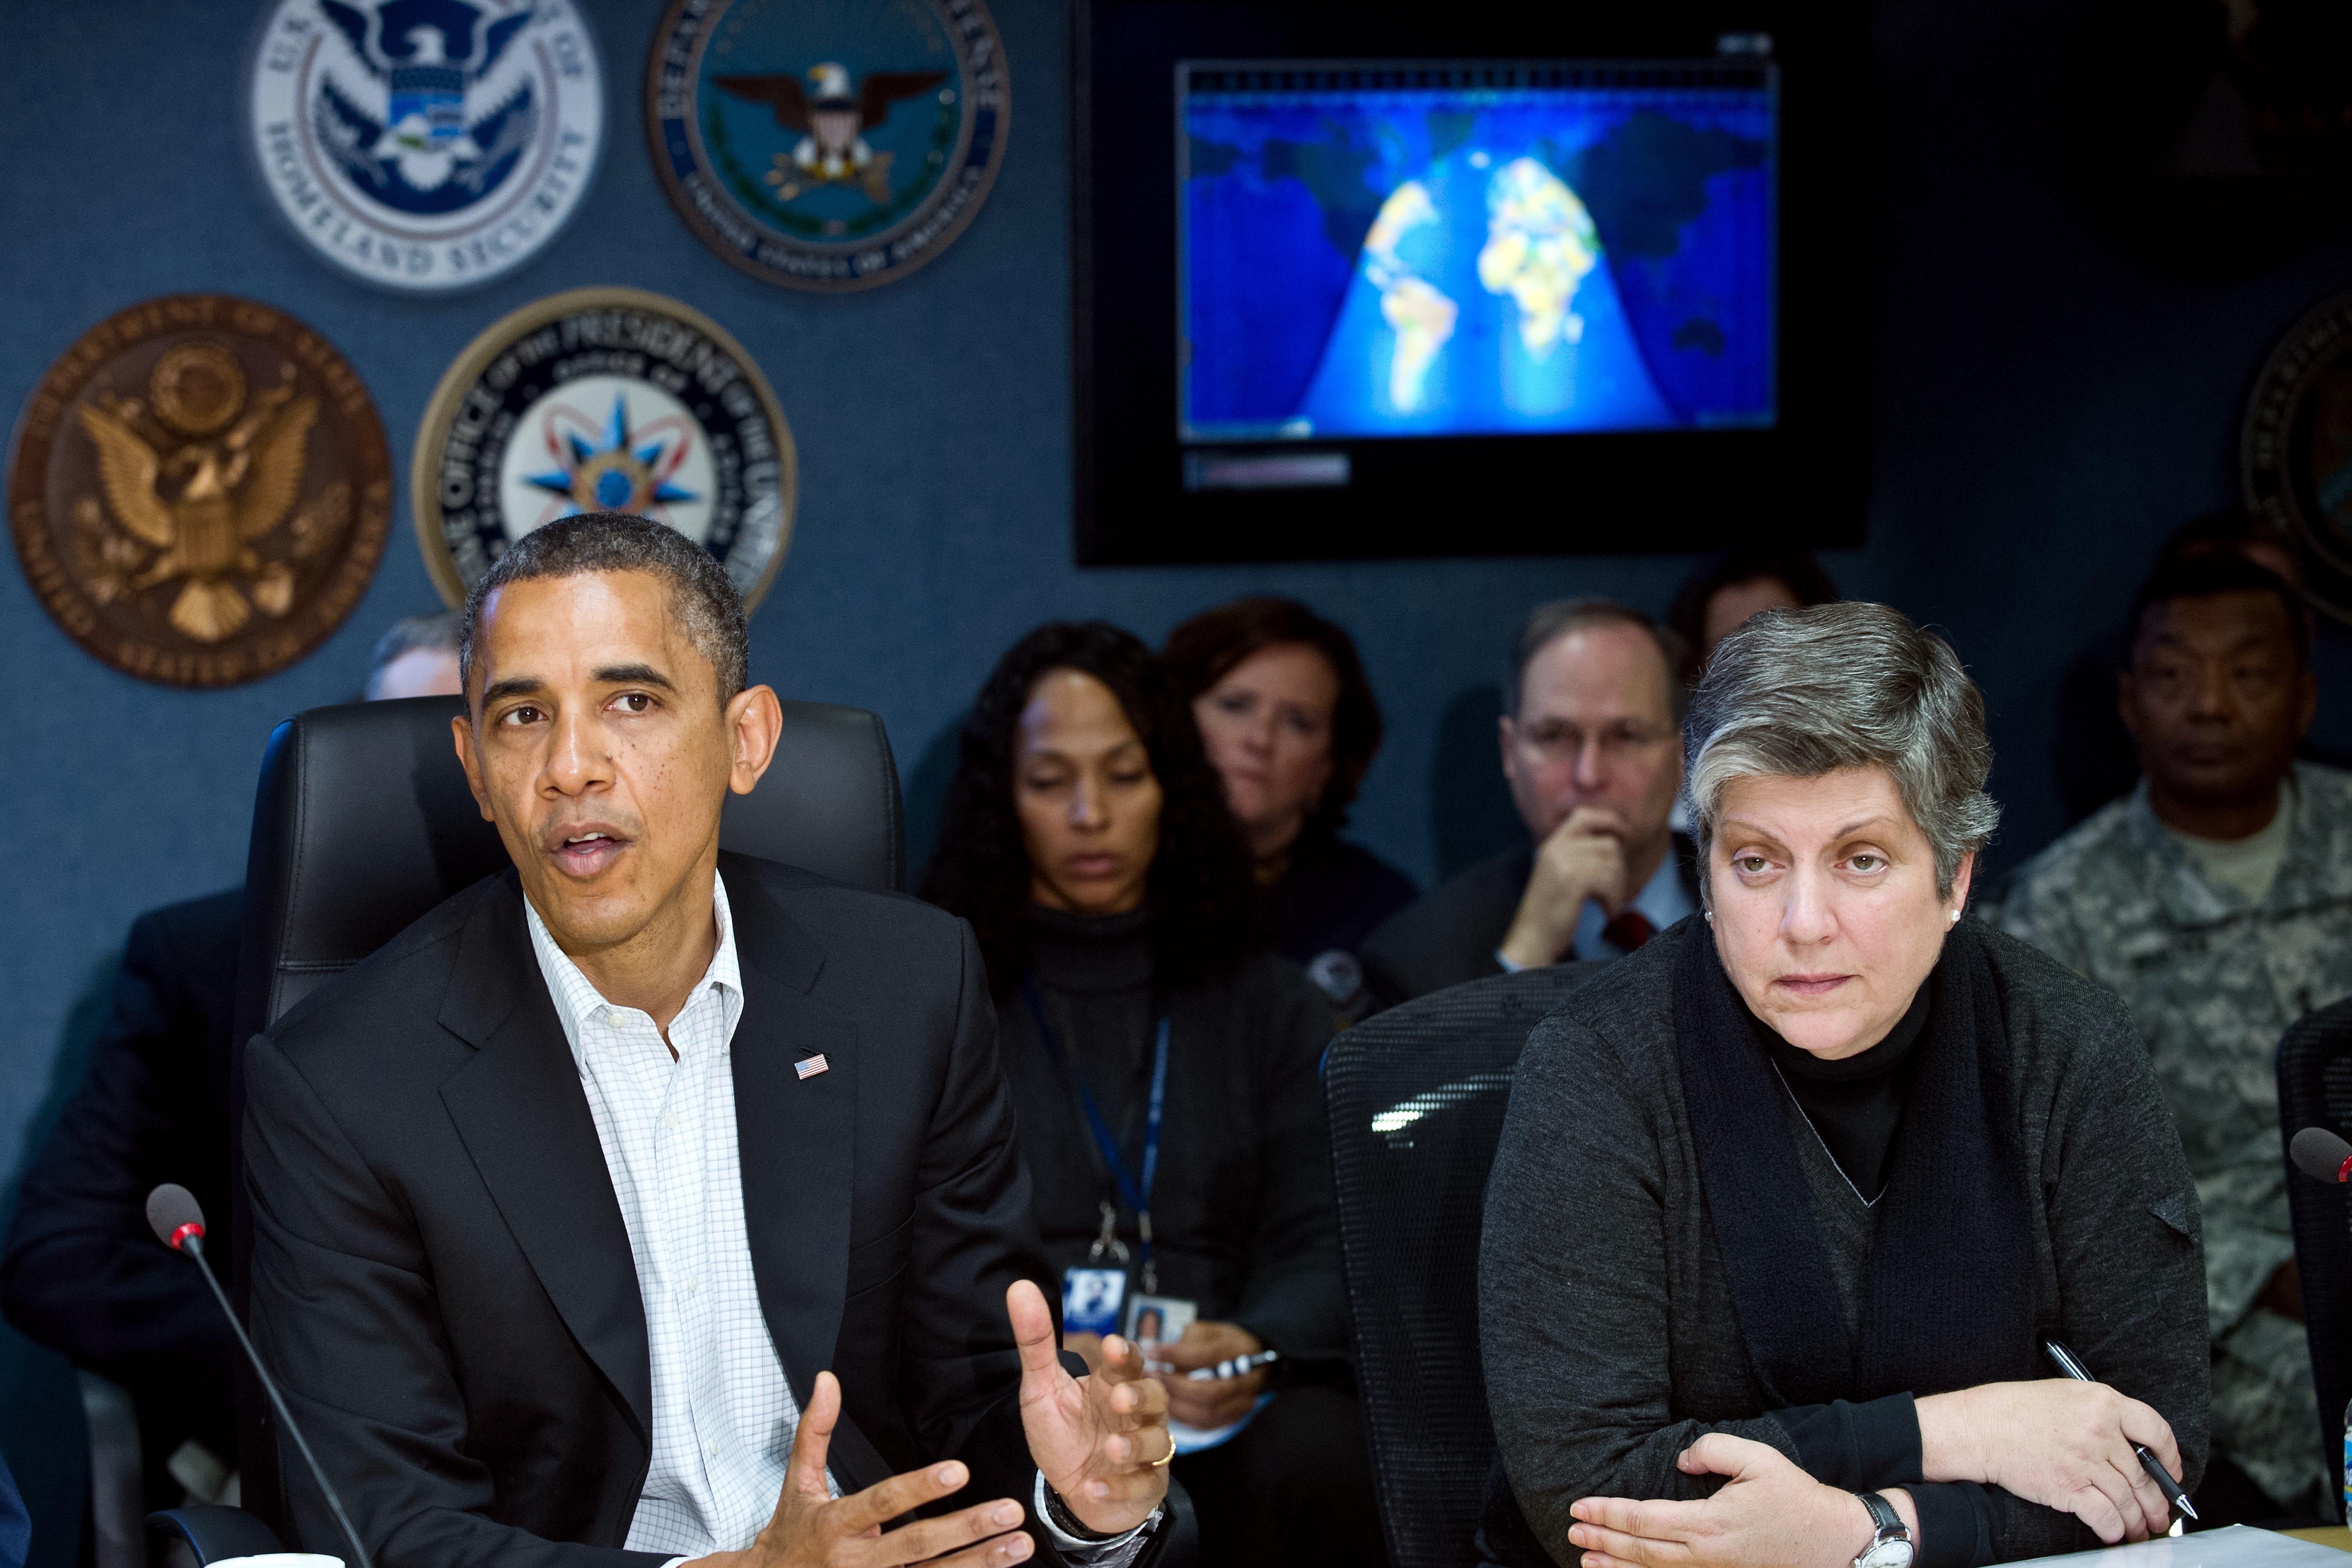 Obama speaks as Napolitano sits next to him at a conference table. A map is projected behind them.